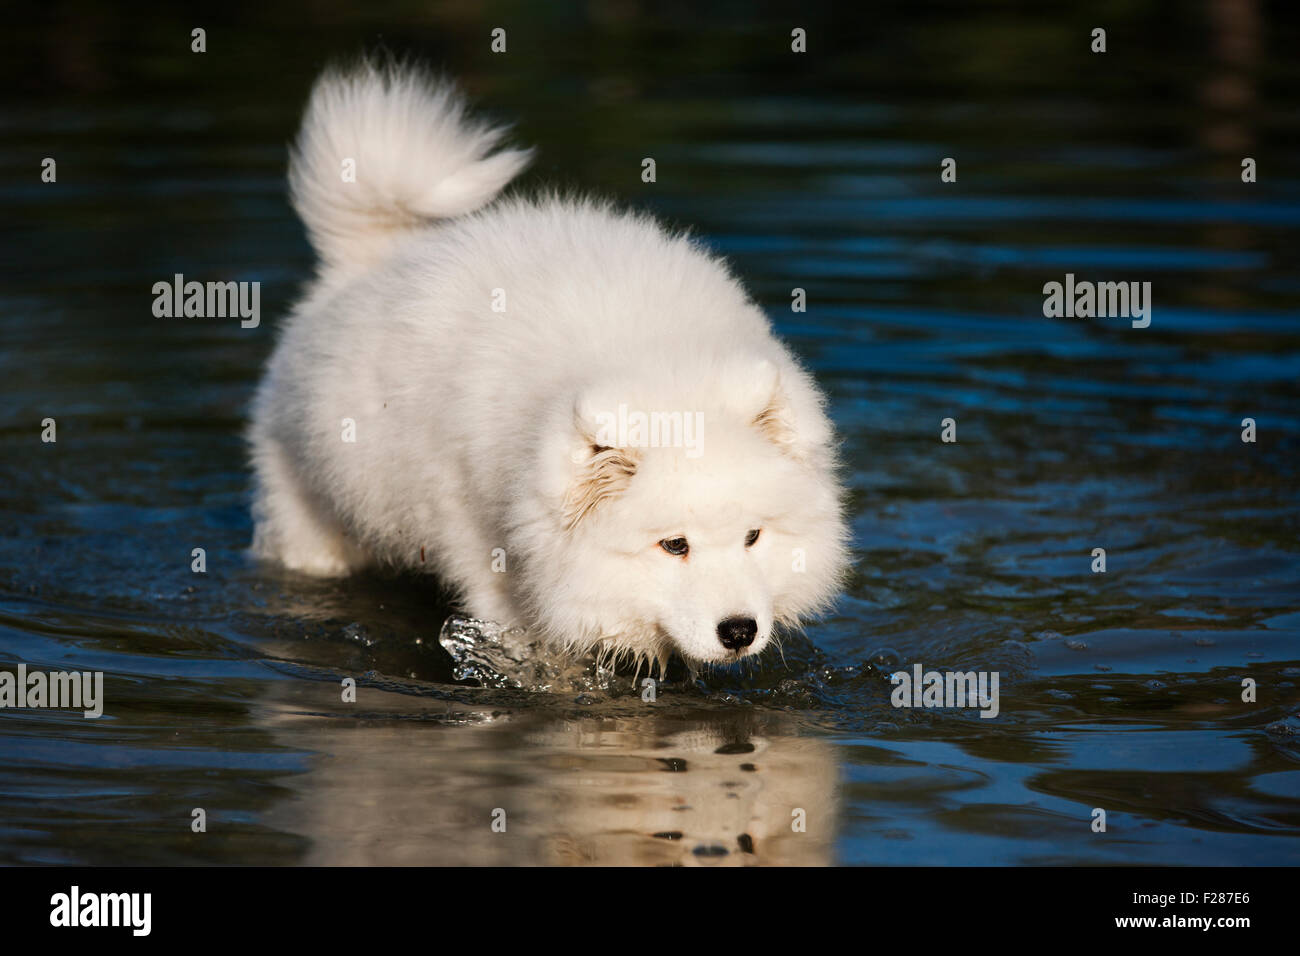 Samoyed dog, puppy, in the water Stock Photo